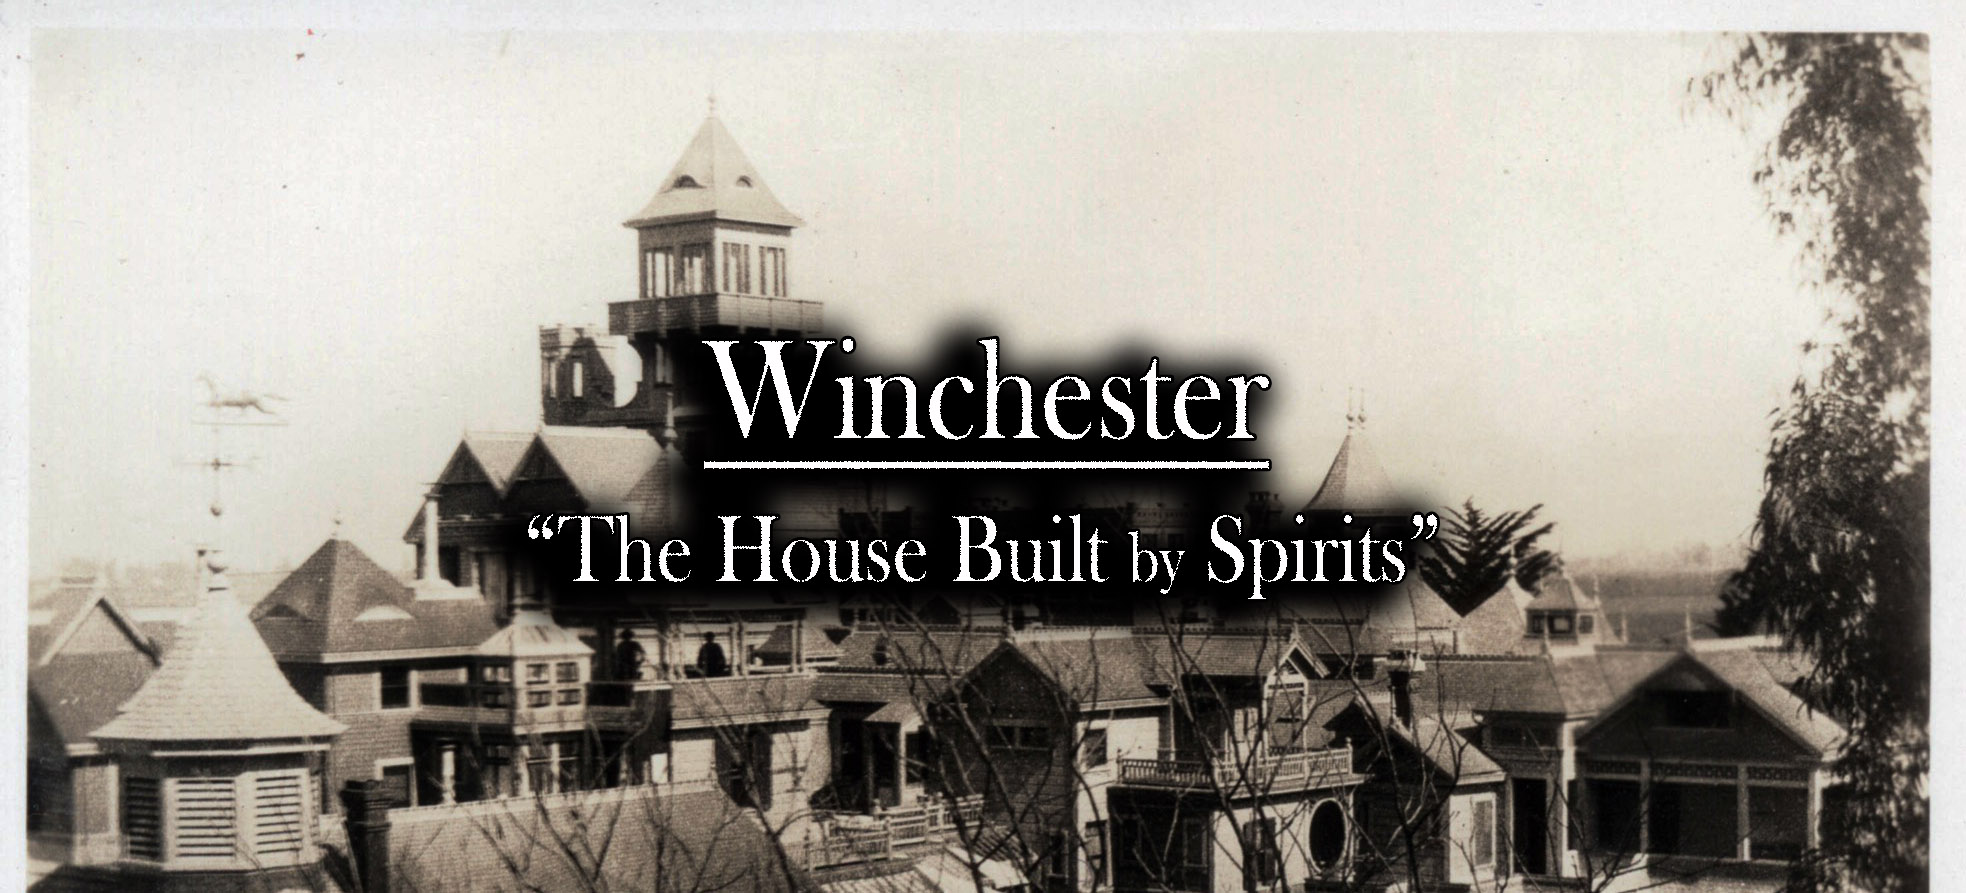 Winchester: “The House Built by Spirits”